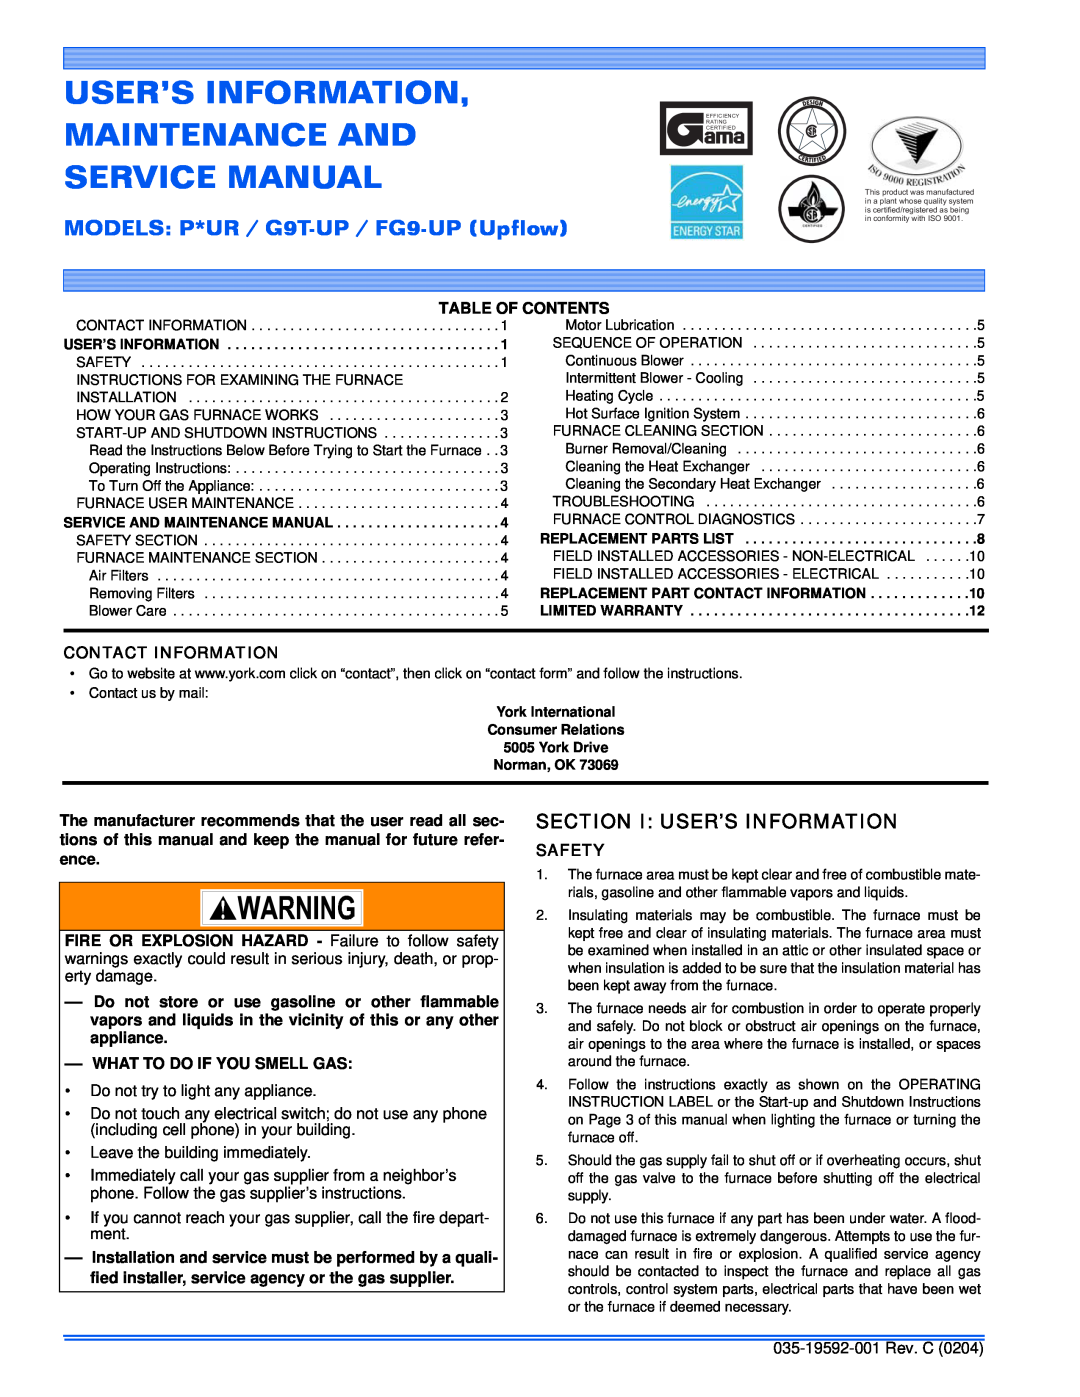 White Rodgers FG9, G9T service manual Section I User’S Information, Table Of Contents, Contact Information, Safety 